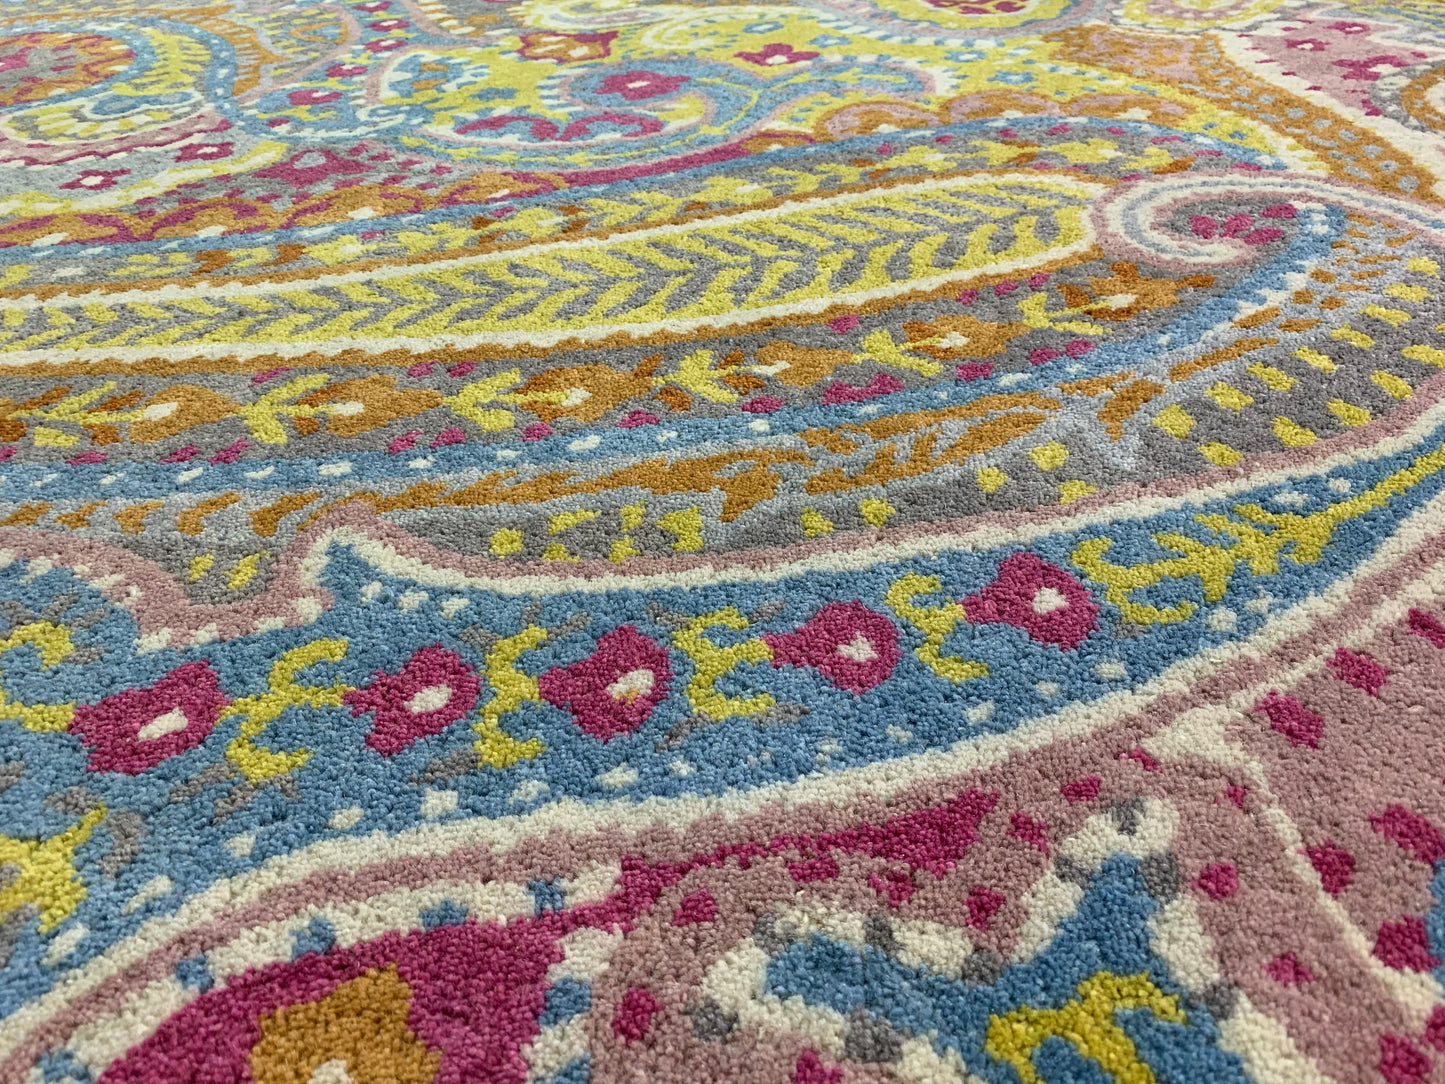 Colorful paisley rug - Tufted wool